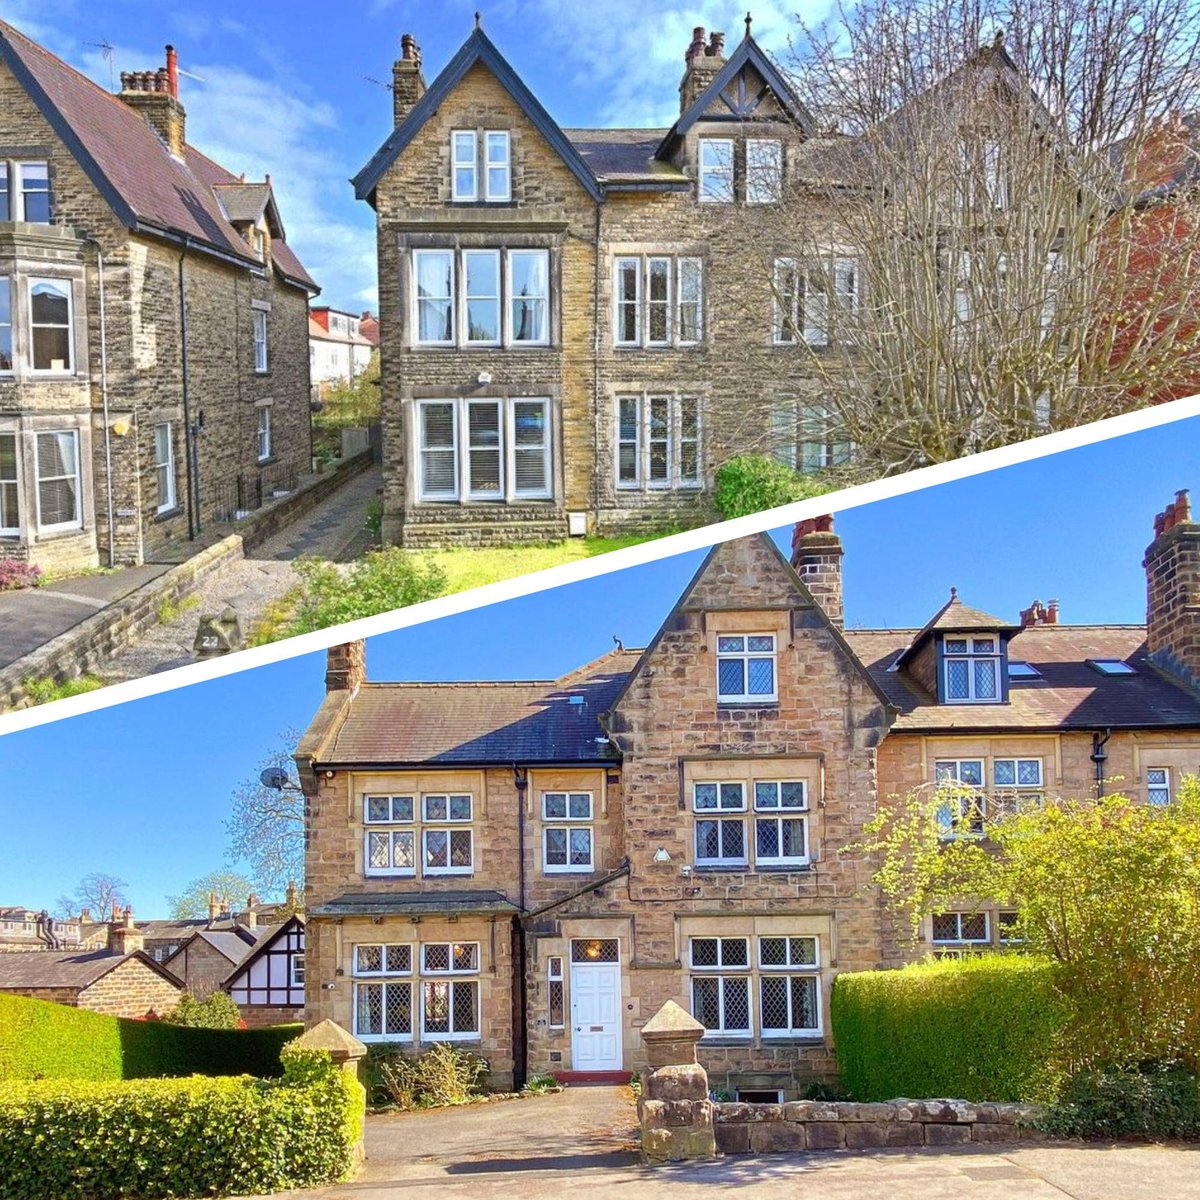 🏡 Delighted to complete on these two substantial period properties this week.😄 
South Drive, Harrogate £1,100,000
York Road, Harrogate £975,000
📲 For advice on selling, or to arrange a valuation of your property, please 01423 562531.
#harrogate #property #theharrogateagent